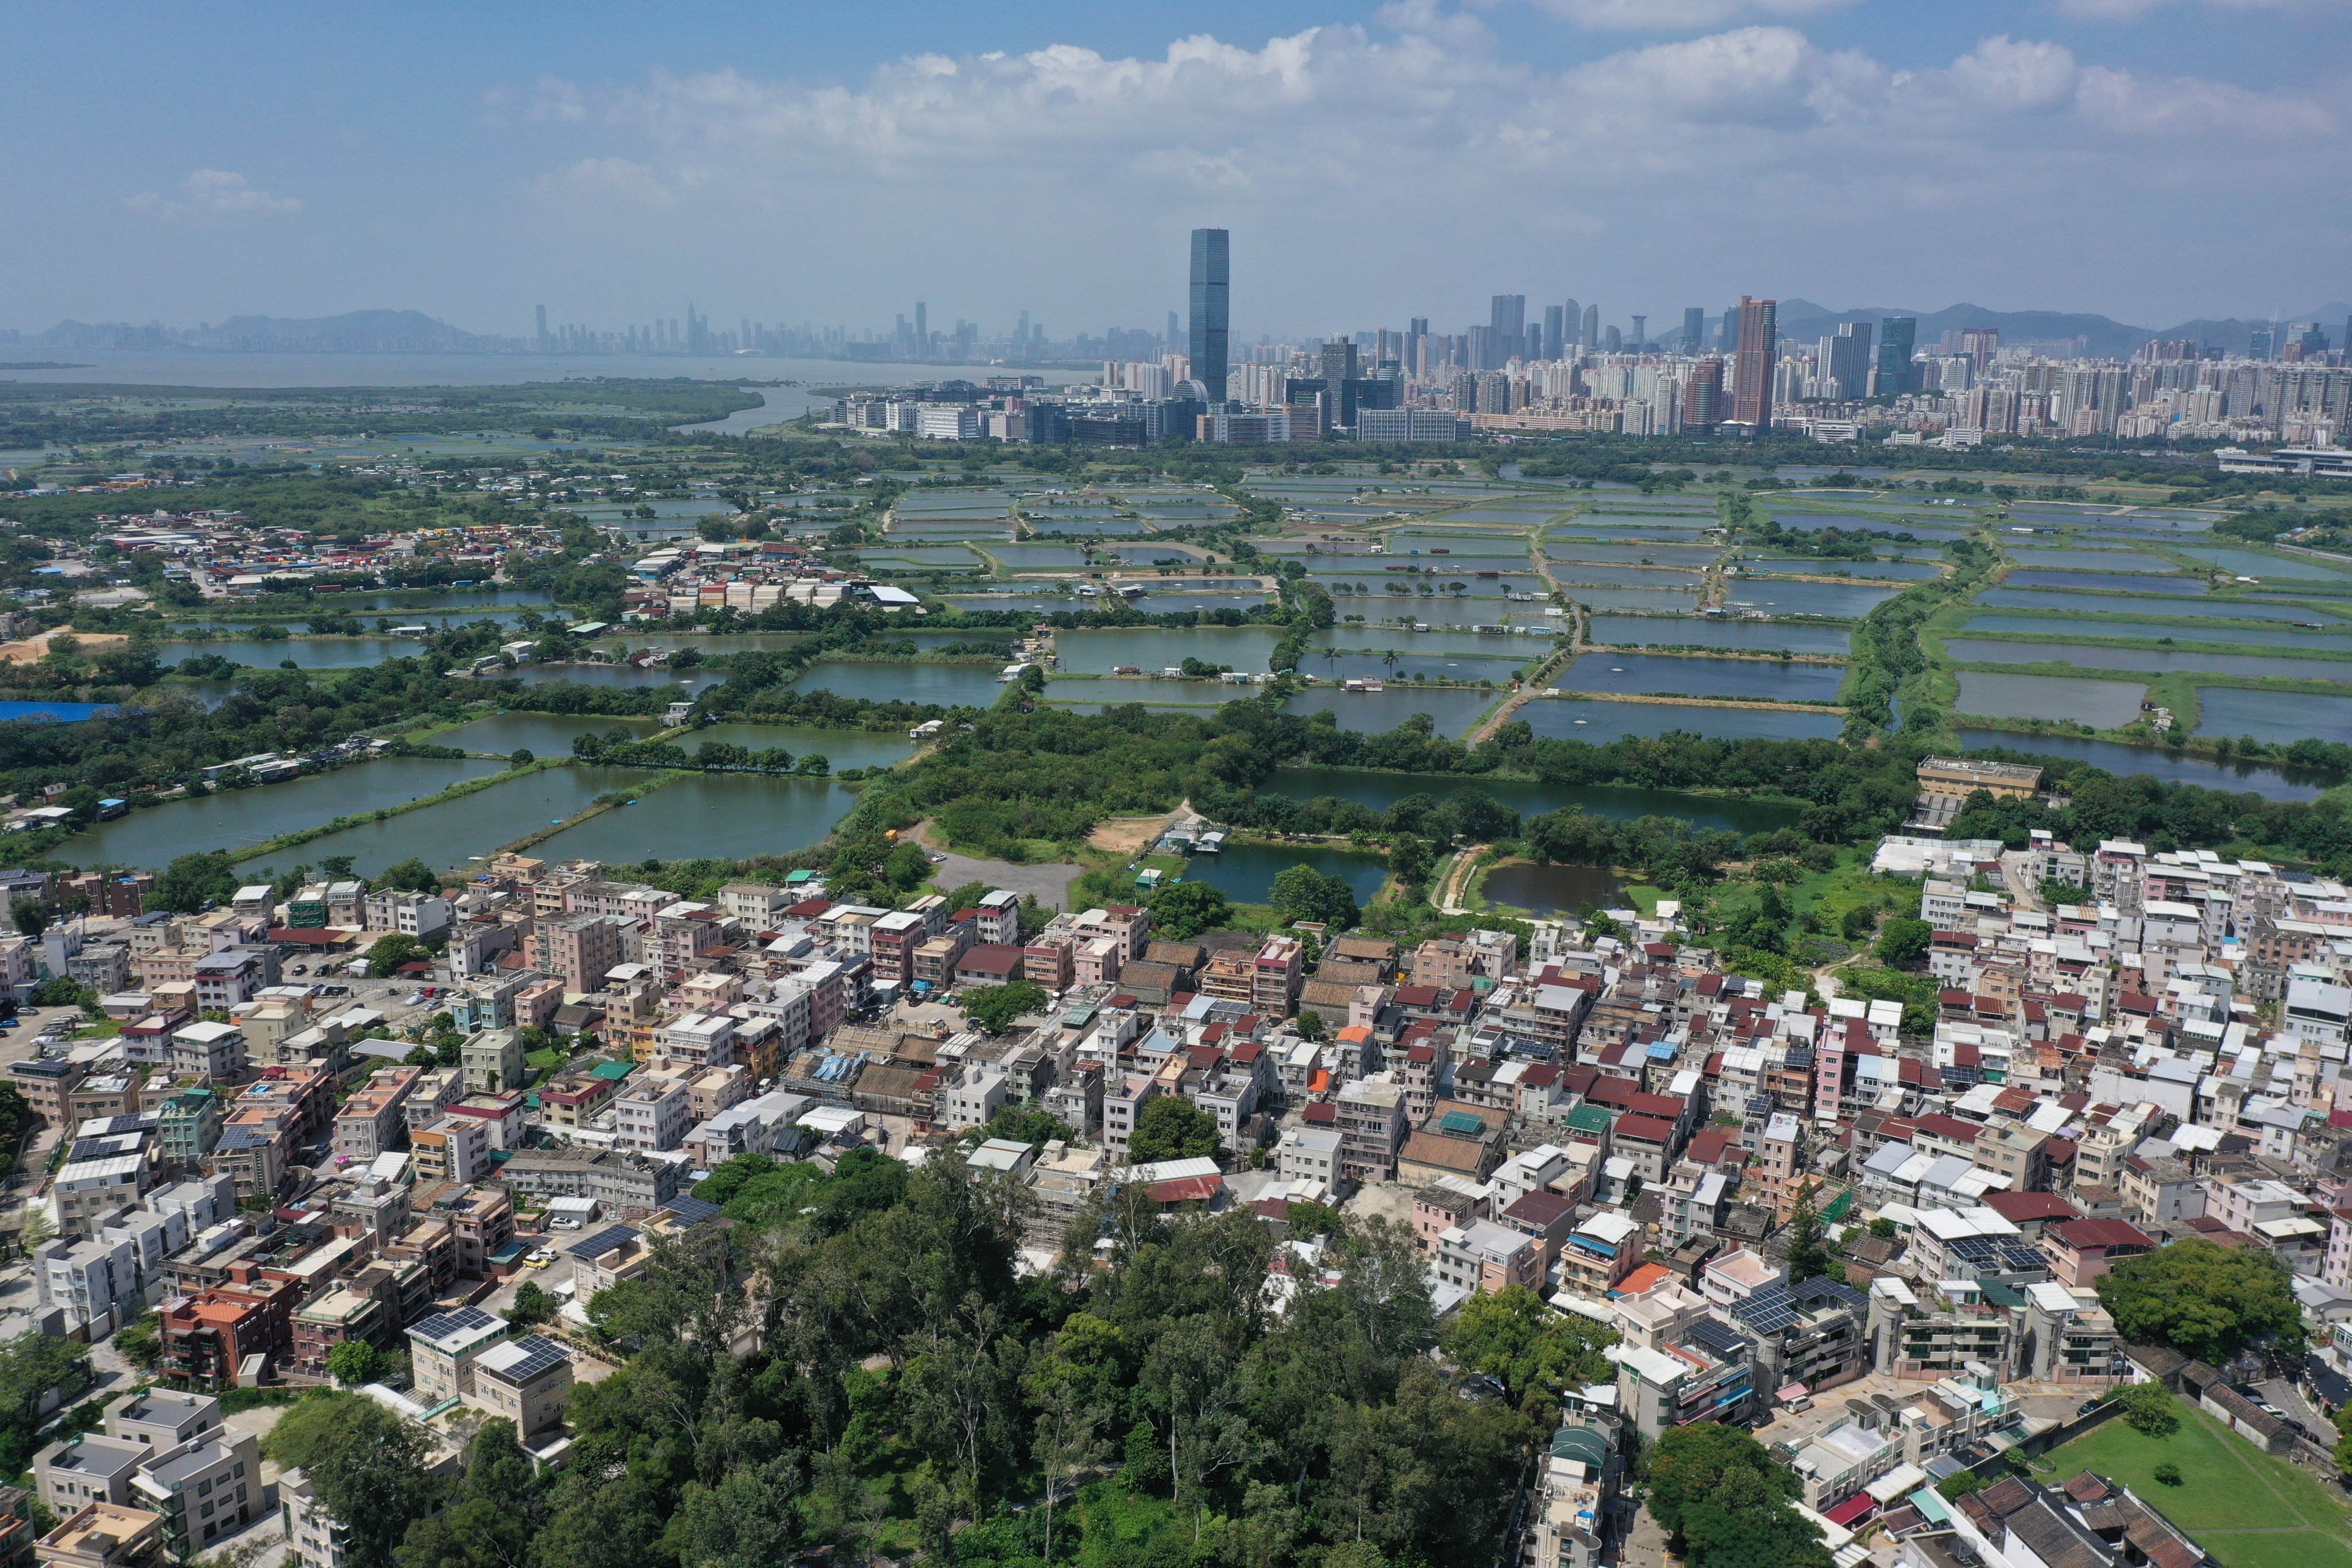 San Tin in the New Territories, with Shenzhen just over the border. The development site covers more than 600 hectares of land. Photo: Winson Wong